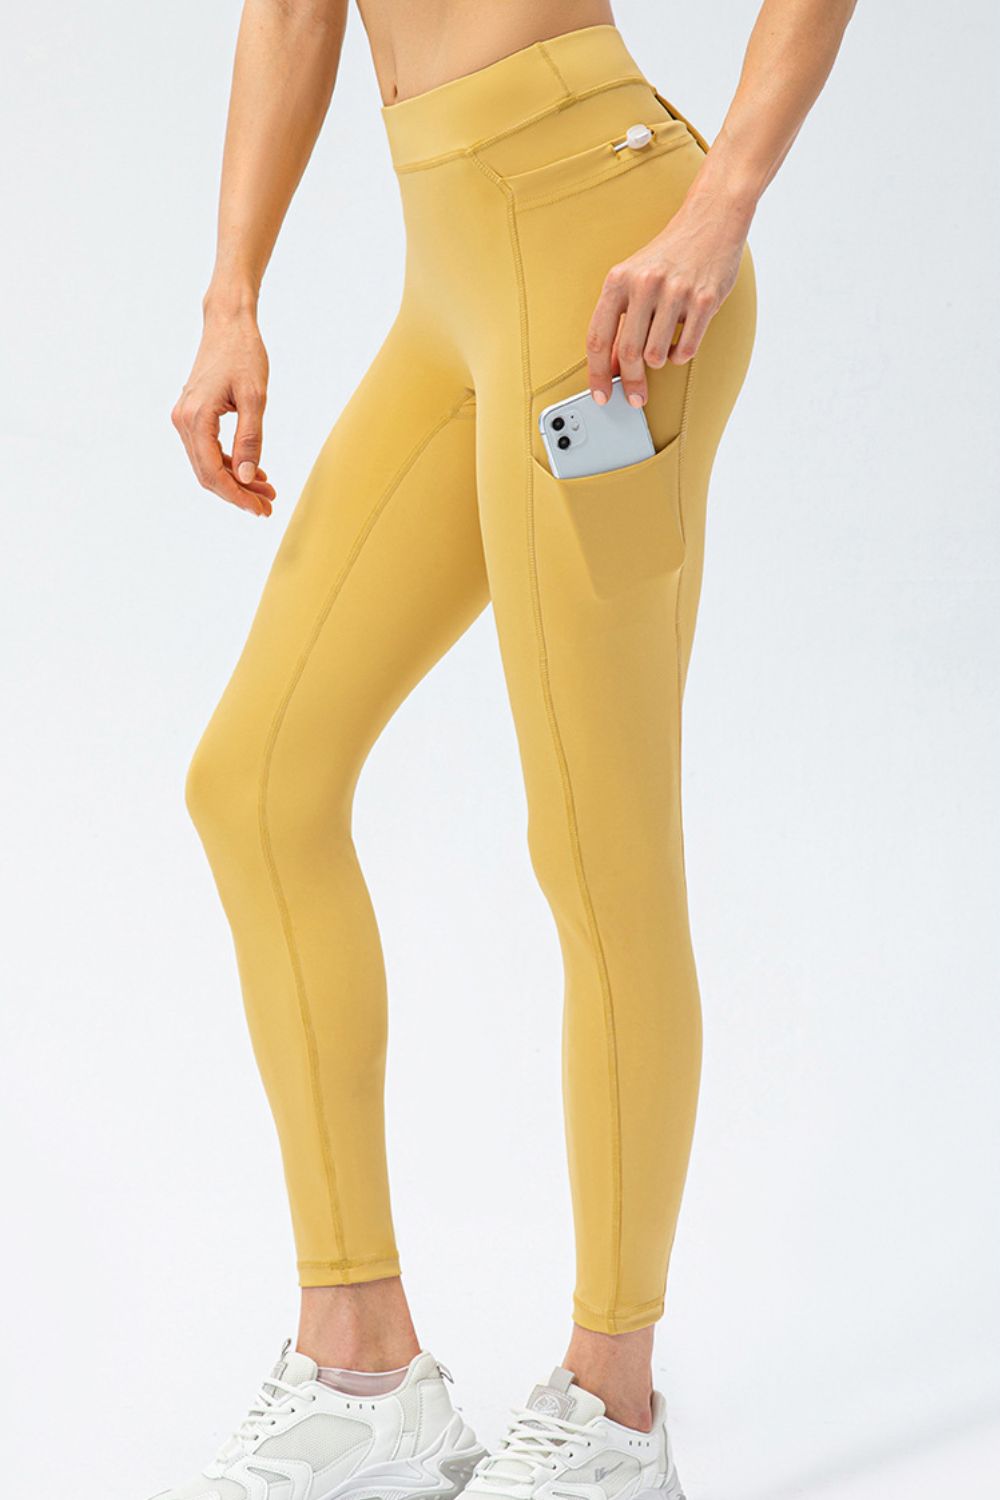 Slim Fit High Waist Long Sports Leggings With Pockets